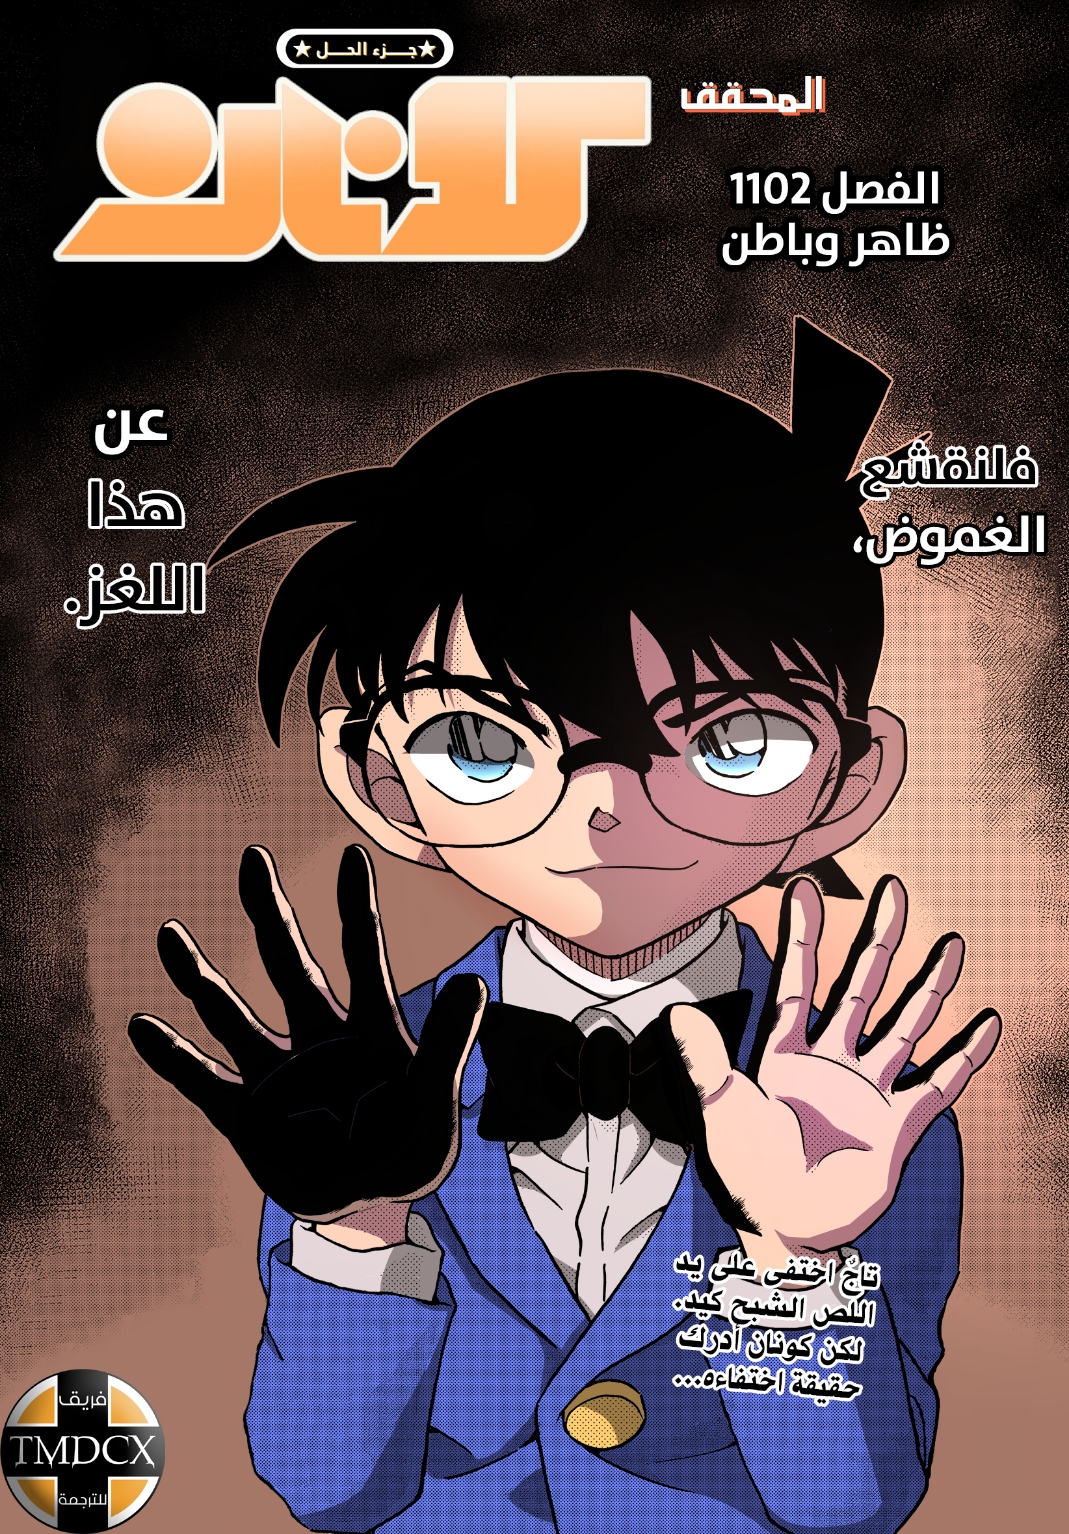 Detective Conan: Chapter 1102 - Page 1